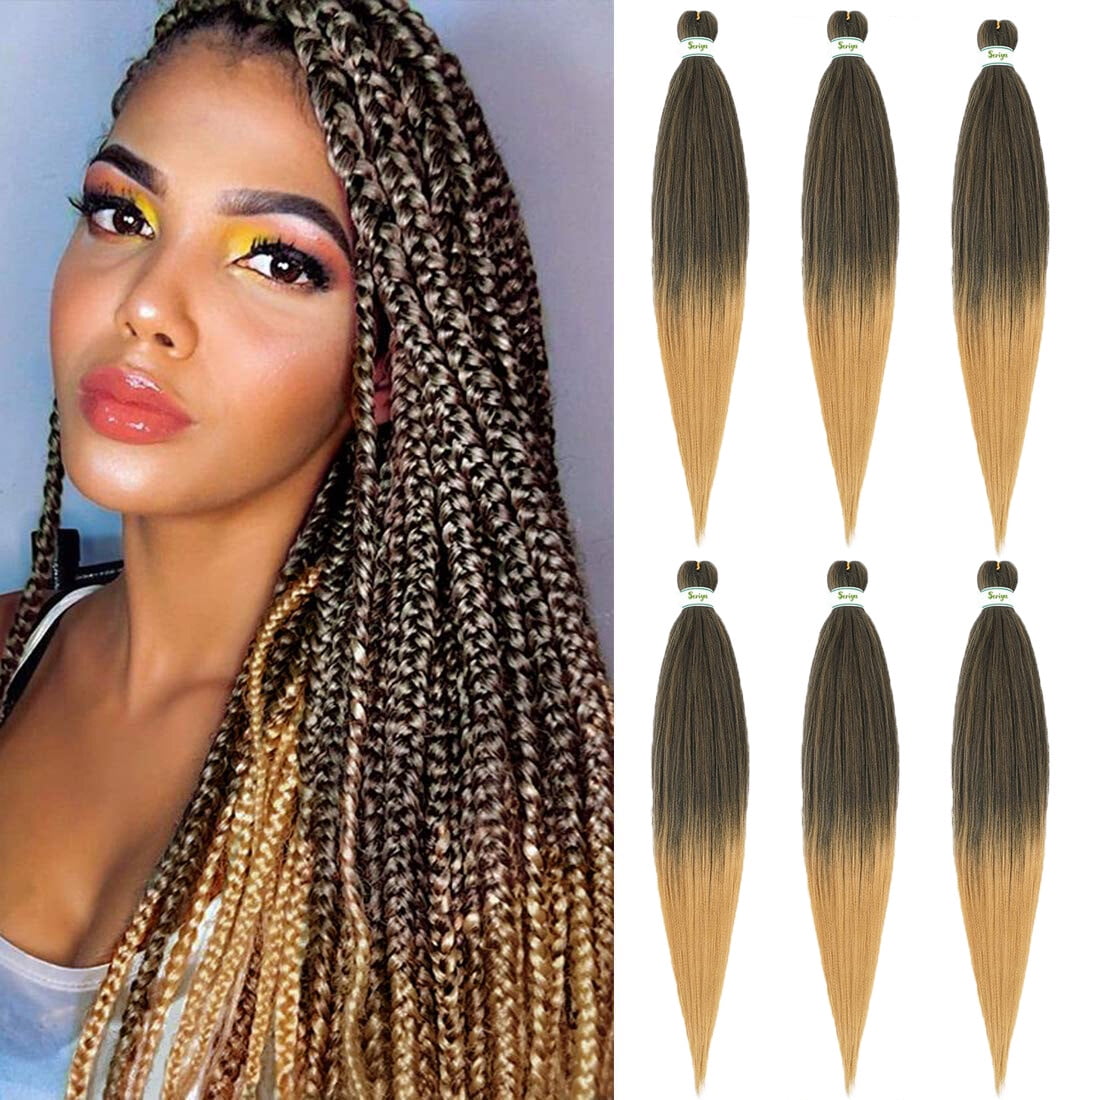  Pre-stretched Braids Hair Professional Itch Free Hot